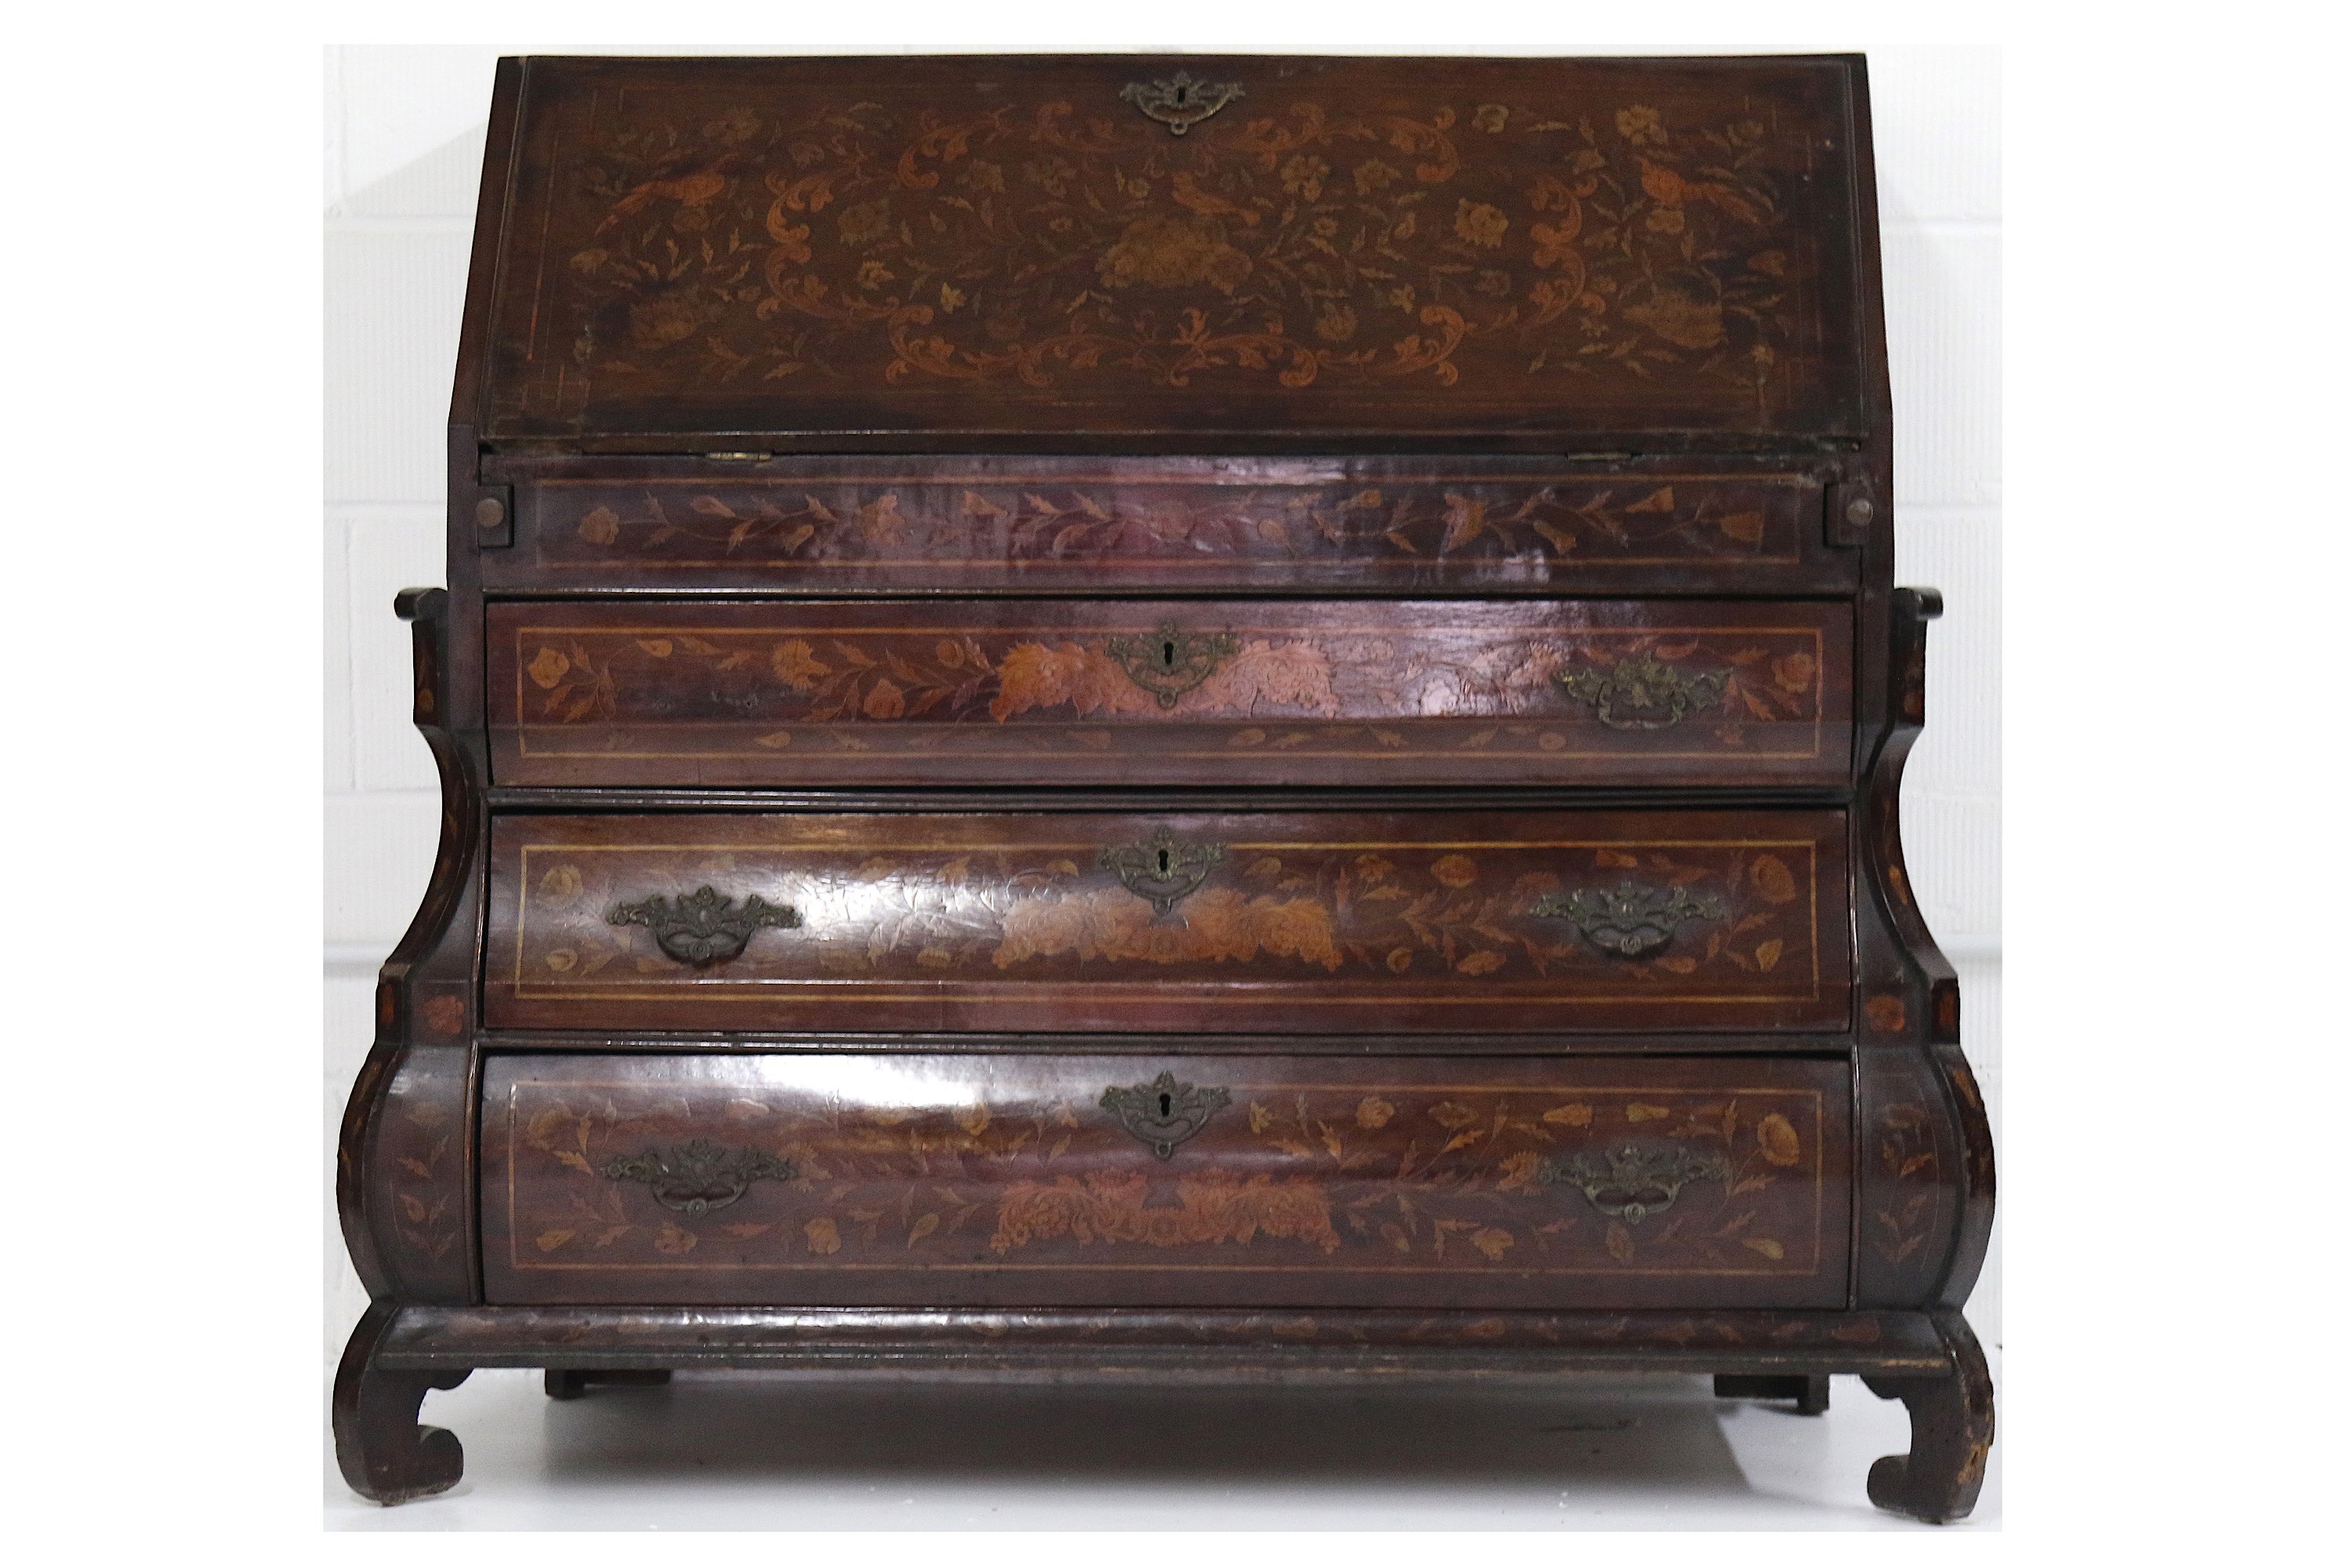 An early 19th Century Dutch walnut and floral marquetry inlaid bombe bureau, the stepped interior